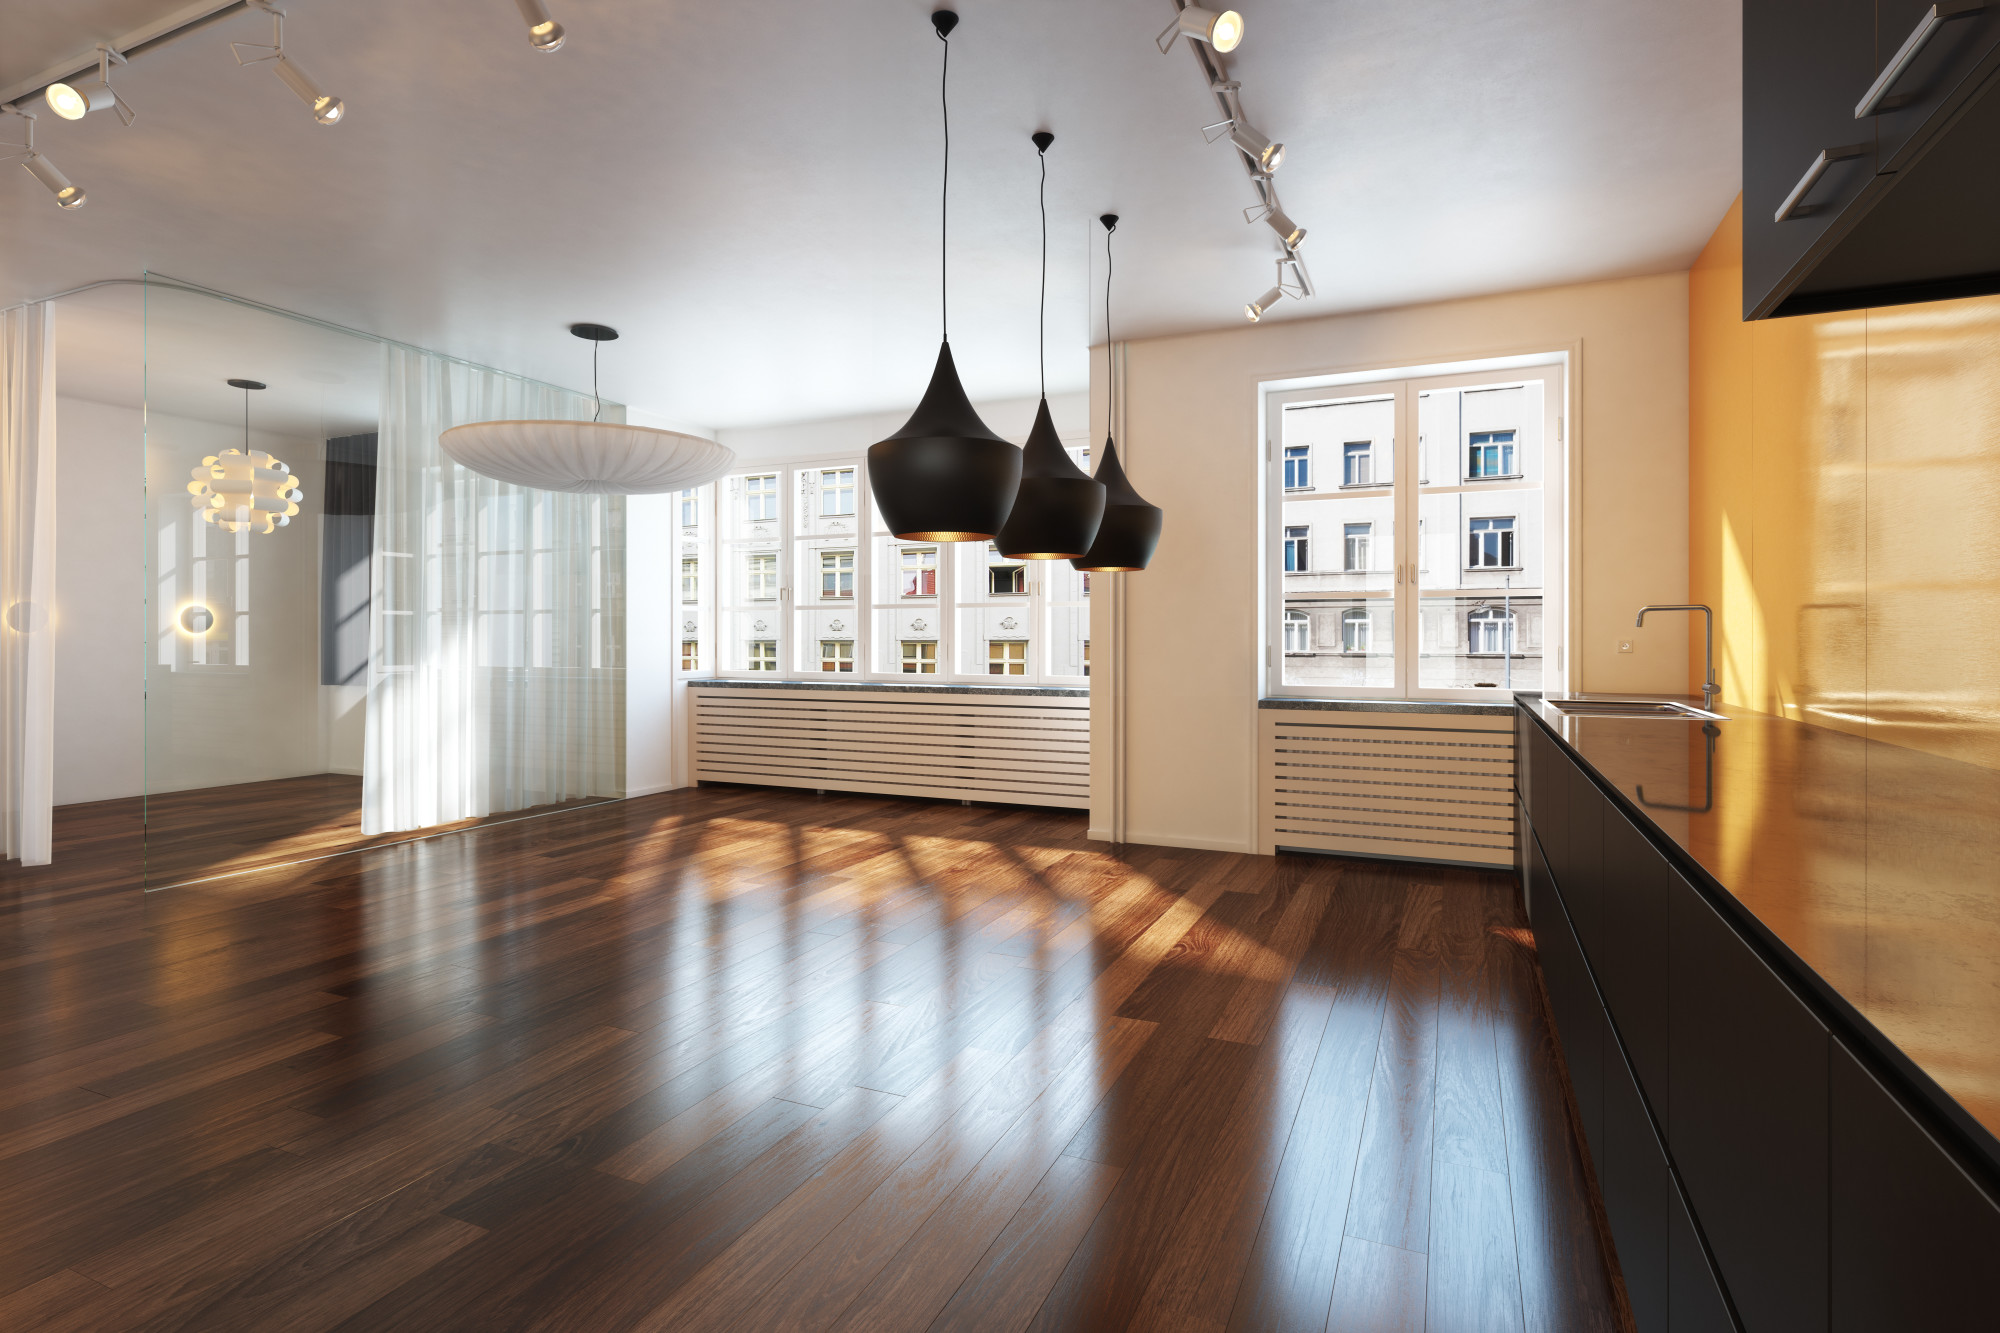 A Guide on How to Choose the Best Hardwood Floors for Your Home